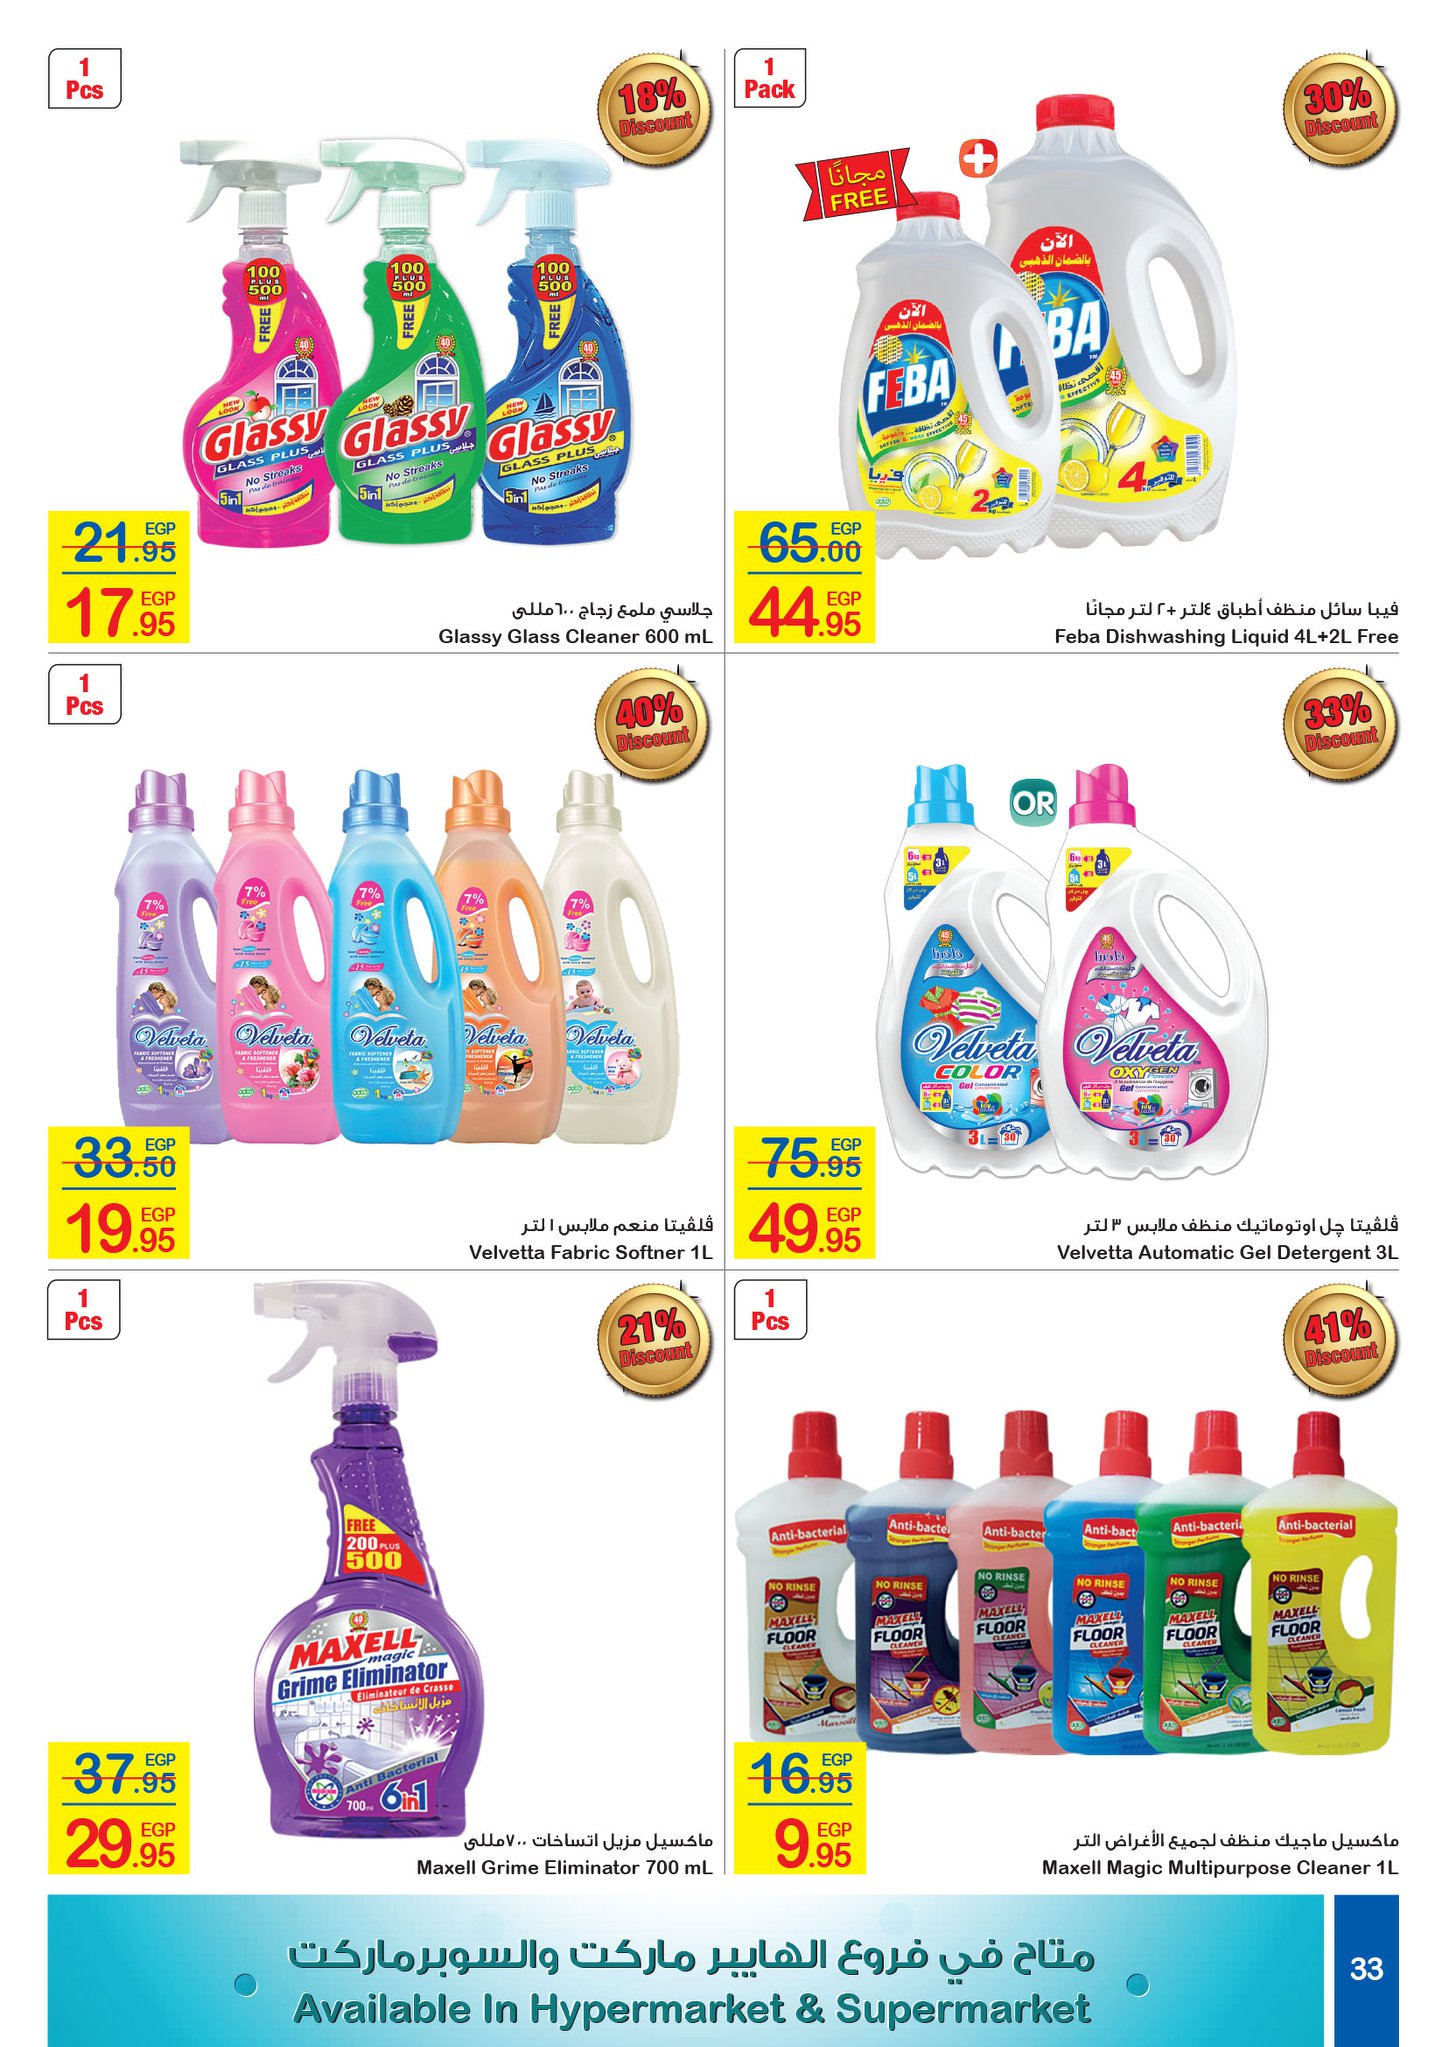 Carrefour Flyer from 16/7 till 27/7 | Carrefour Egypt 32